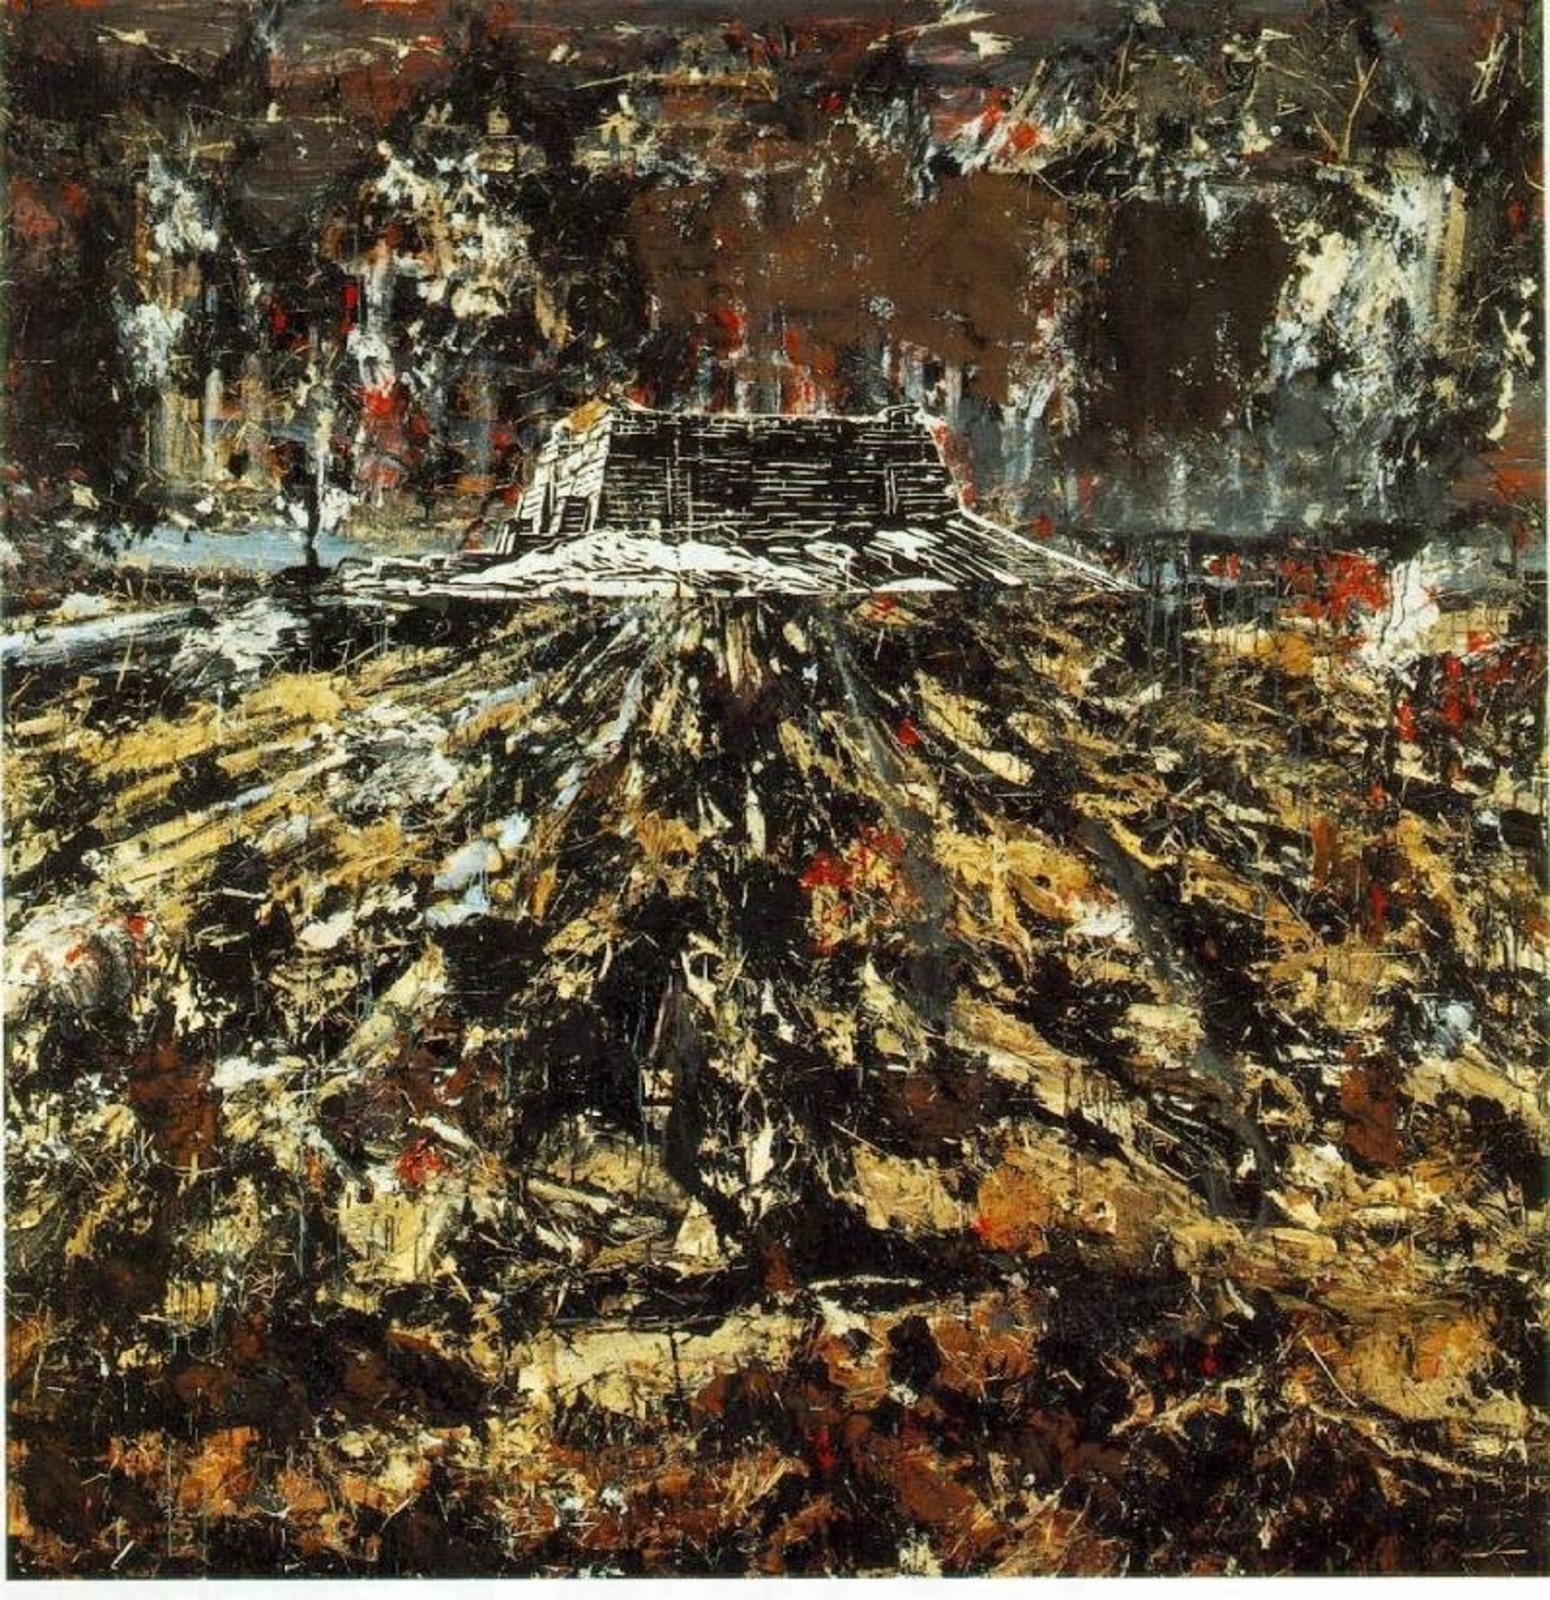 Anselm Kiefer. Unknown artist. 1983. Oil on canvas, water paint, latex, resin, straw. Carnegie Museum of Art, Pittsburgh. 279.4 x 279.4 cm